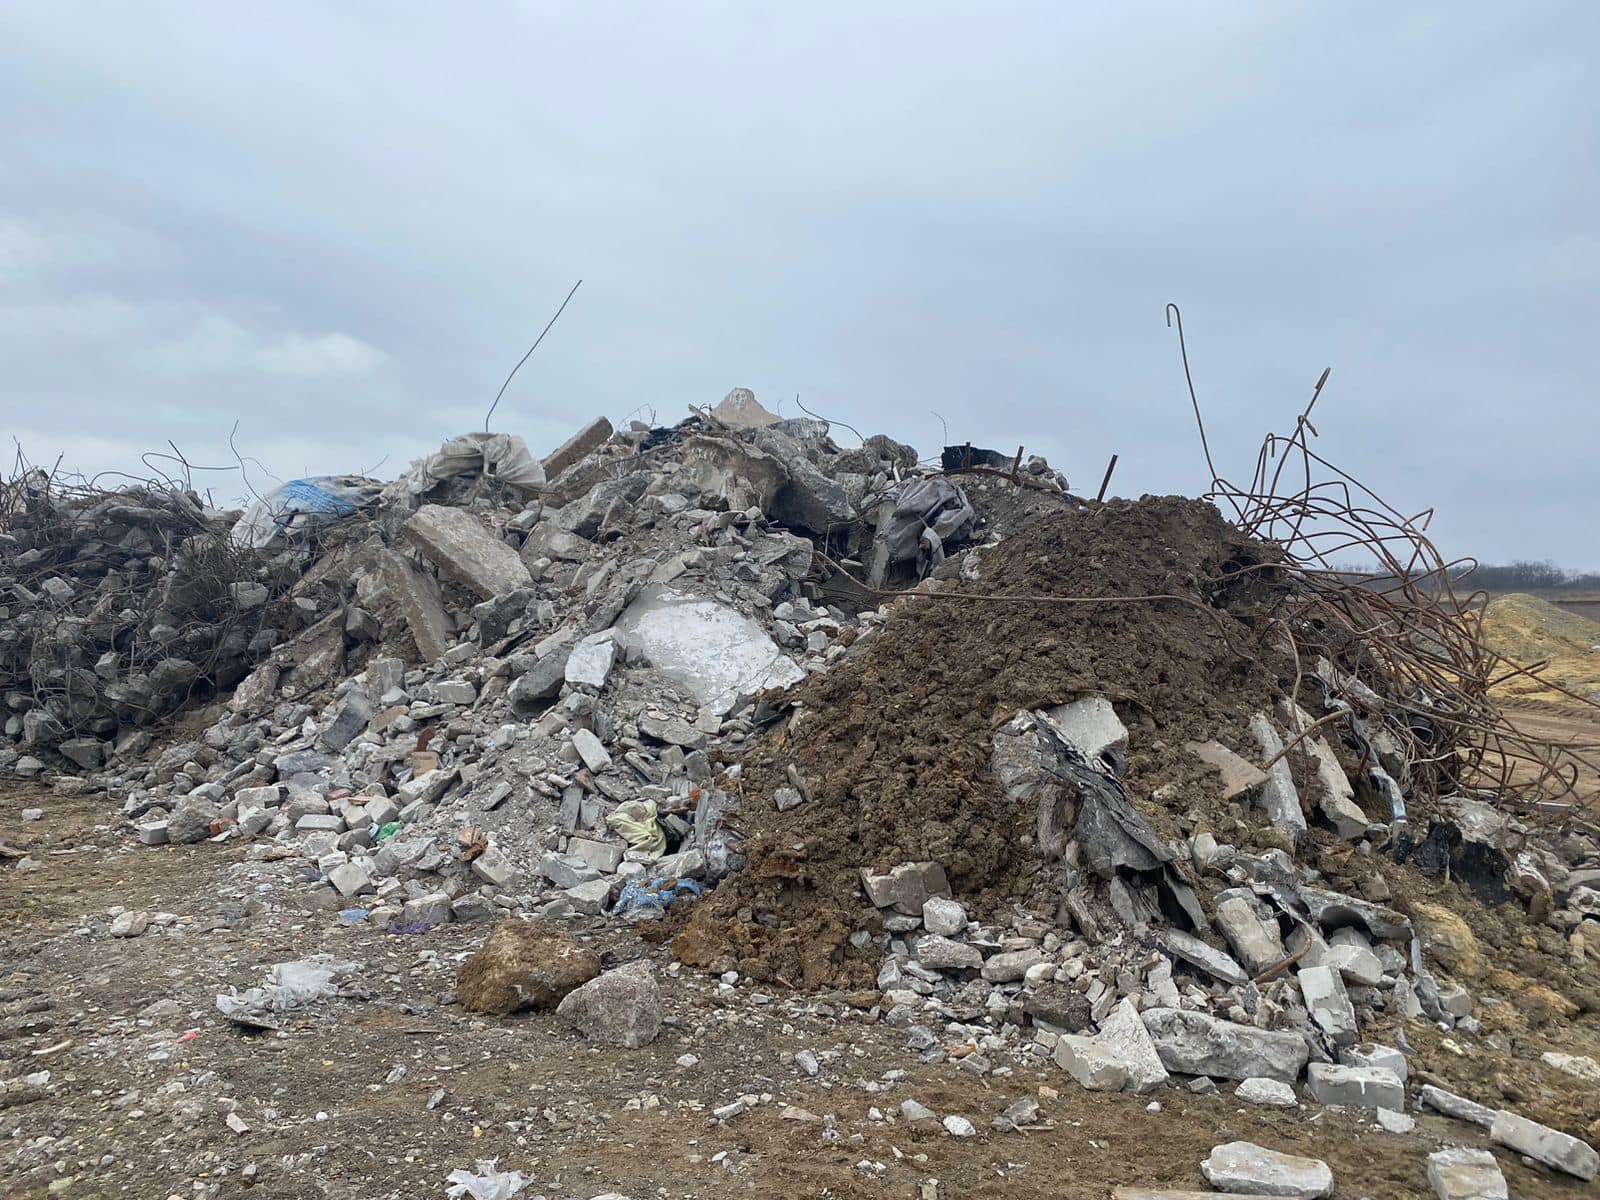 In Ukraine, the destruction has resulted in the generation of over 600,000 tons of debris